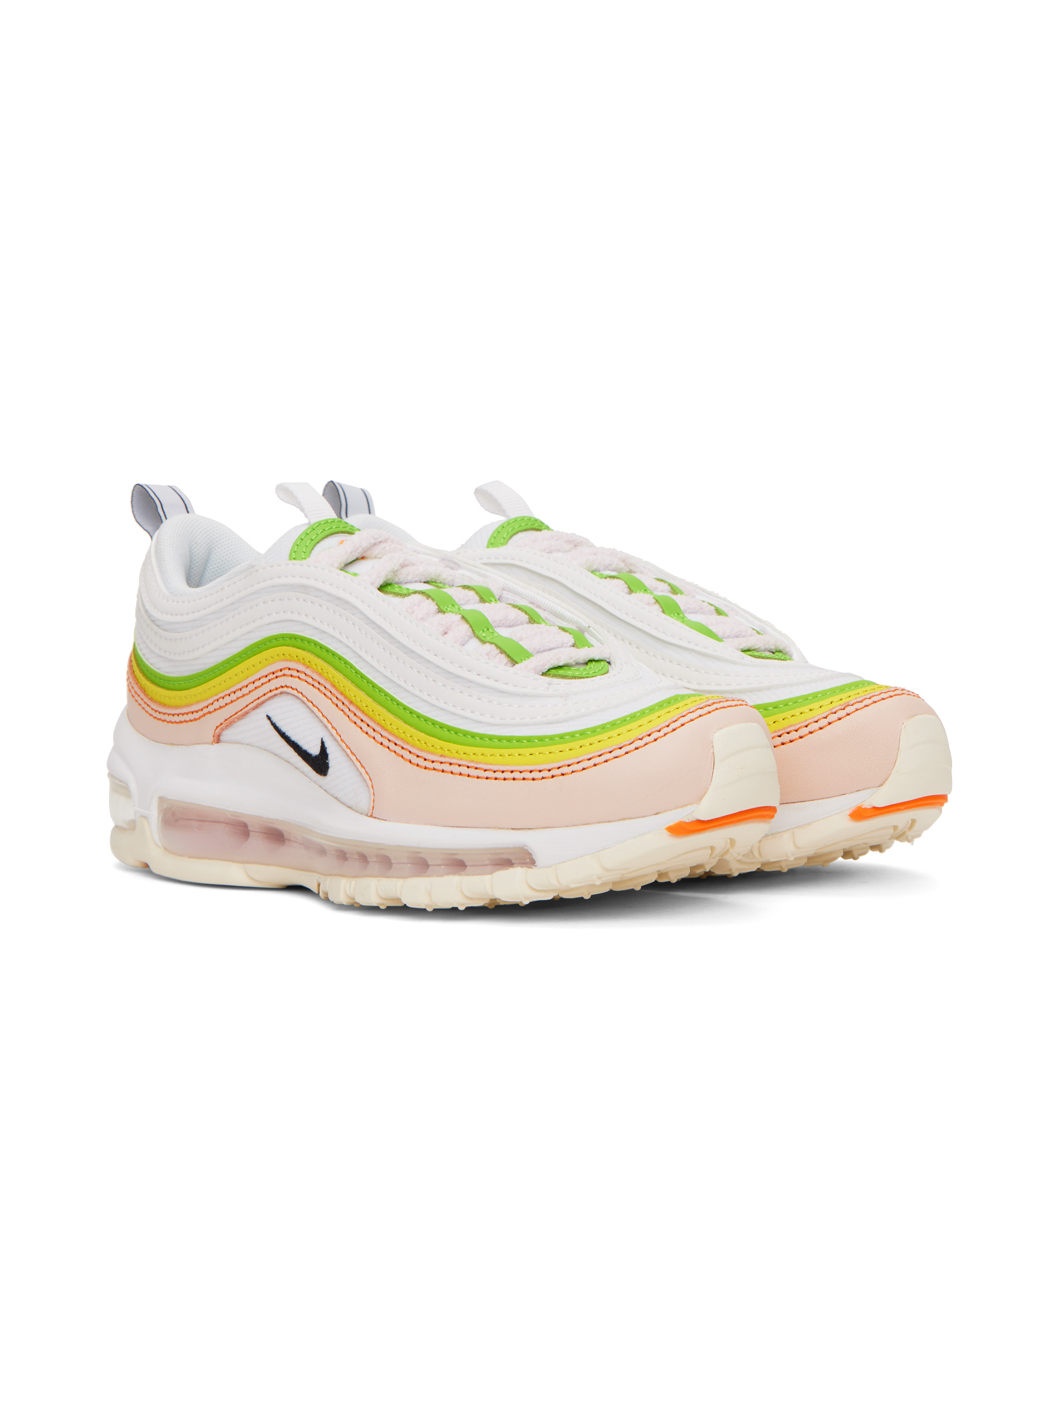 White & Pink Air Max 97 Sneakers - 4